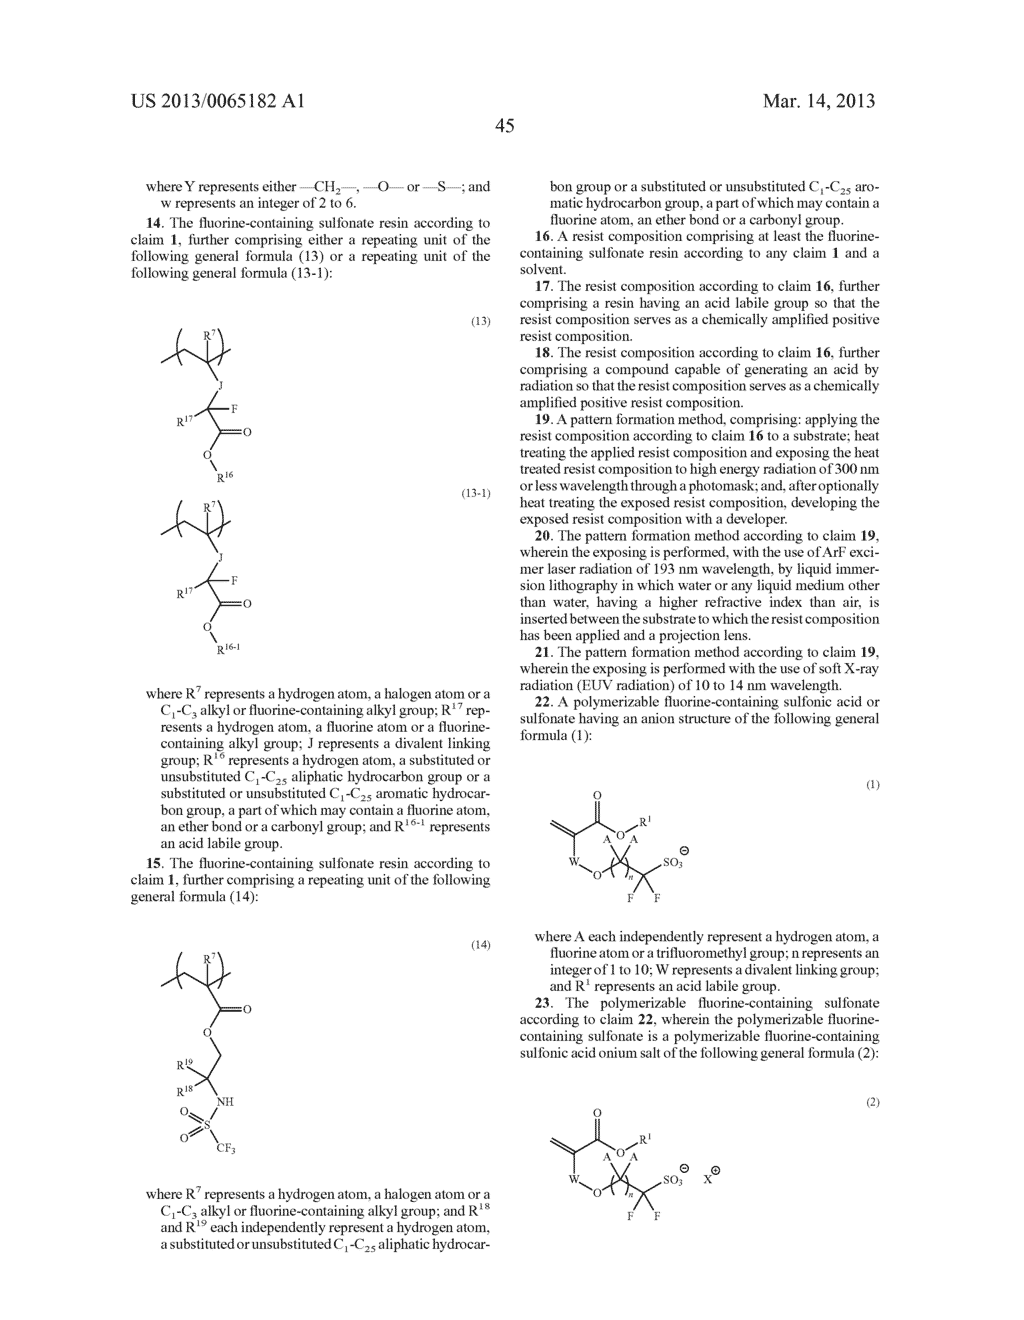 Fluorine-Containing Sulfonate, Fluorine-Containing Sulfonate Resin, Resist     Composition and Pattern Formation Method - diagram, schematic, and image 46